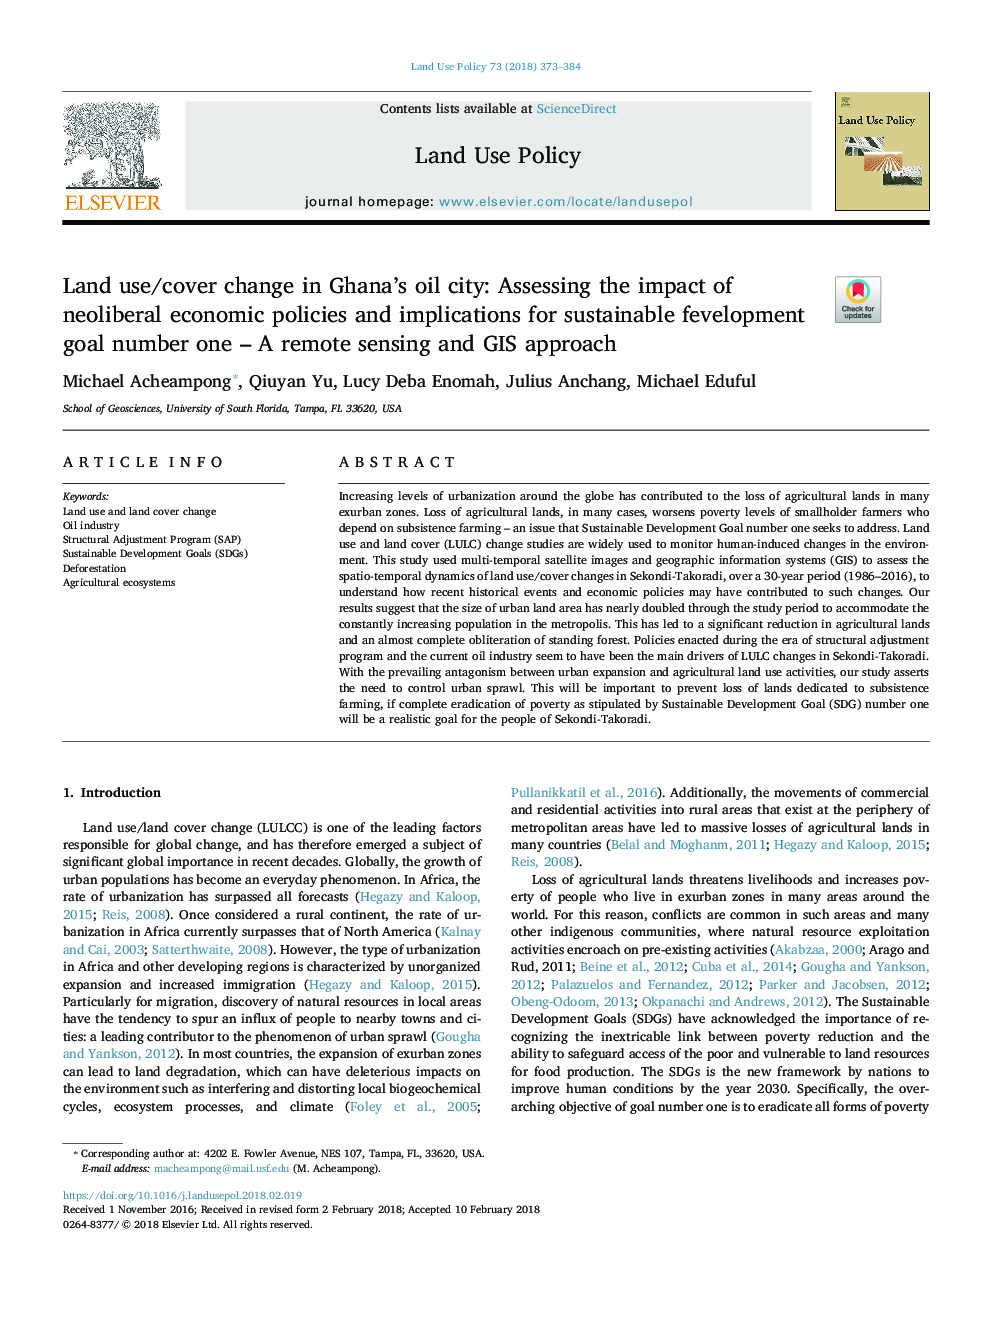 Land use/cover change in Ghana's oil city: Assessing the impact of neoliberal economic policies and implications for sustainable development goal number one - A remote sensing and GIS approach